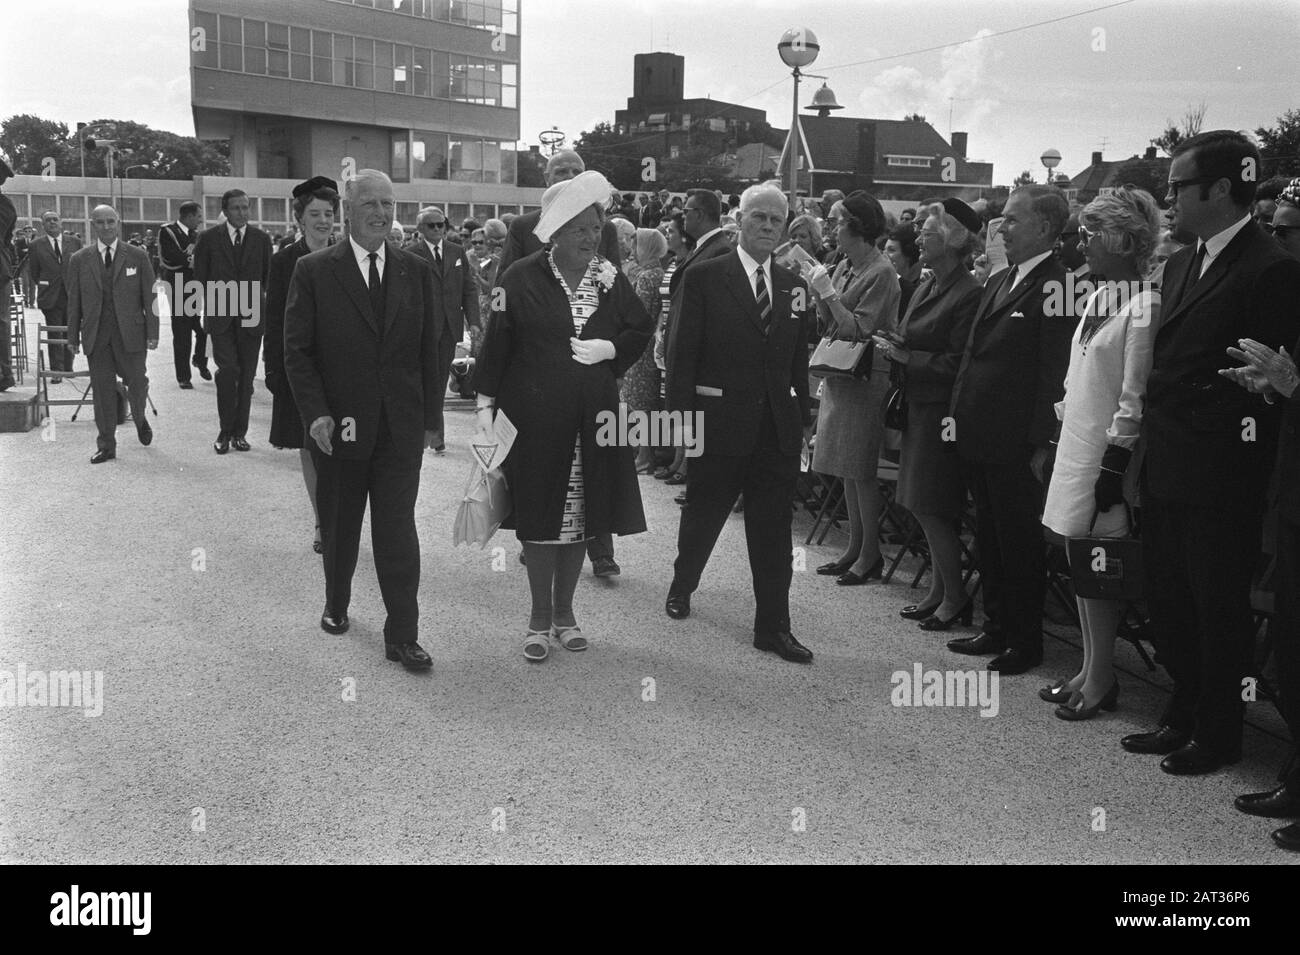 Commemoration due to the end of war 25 years ago Z-O-Asia, in Congresgebouw, The Hague, with queen Juliana Date: August 15, 1970 Location: The Hague, Zuid-Holland Keywords: commemorations, queens Personal name: Juliana (queen Netherlands) Stock Photo